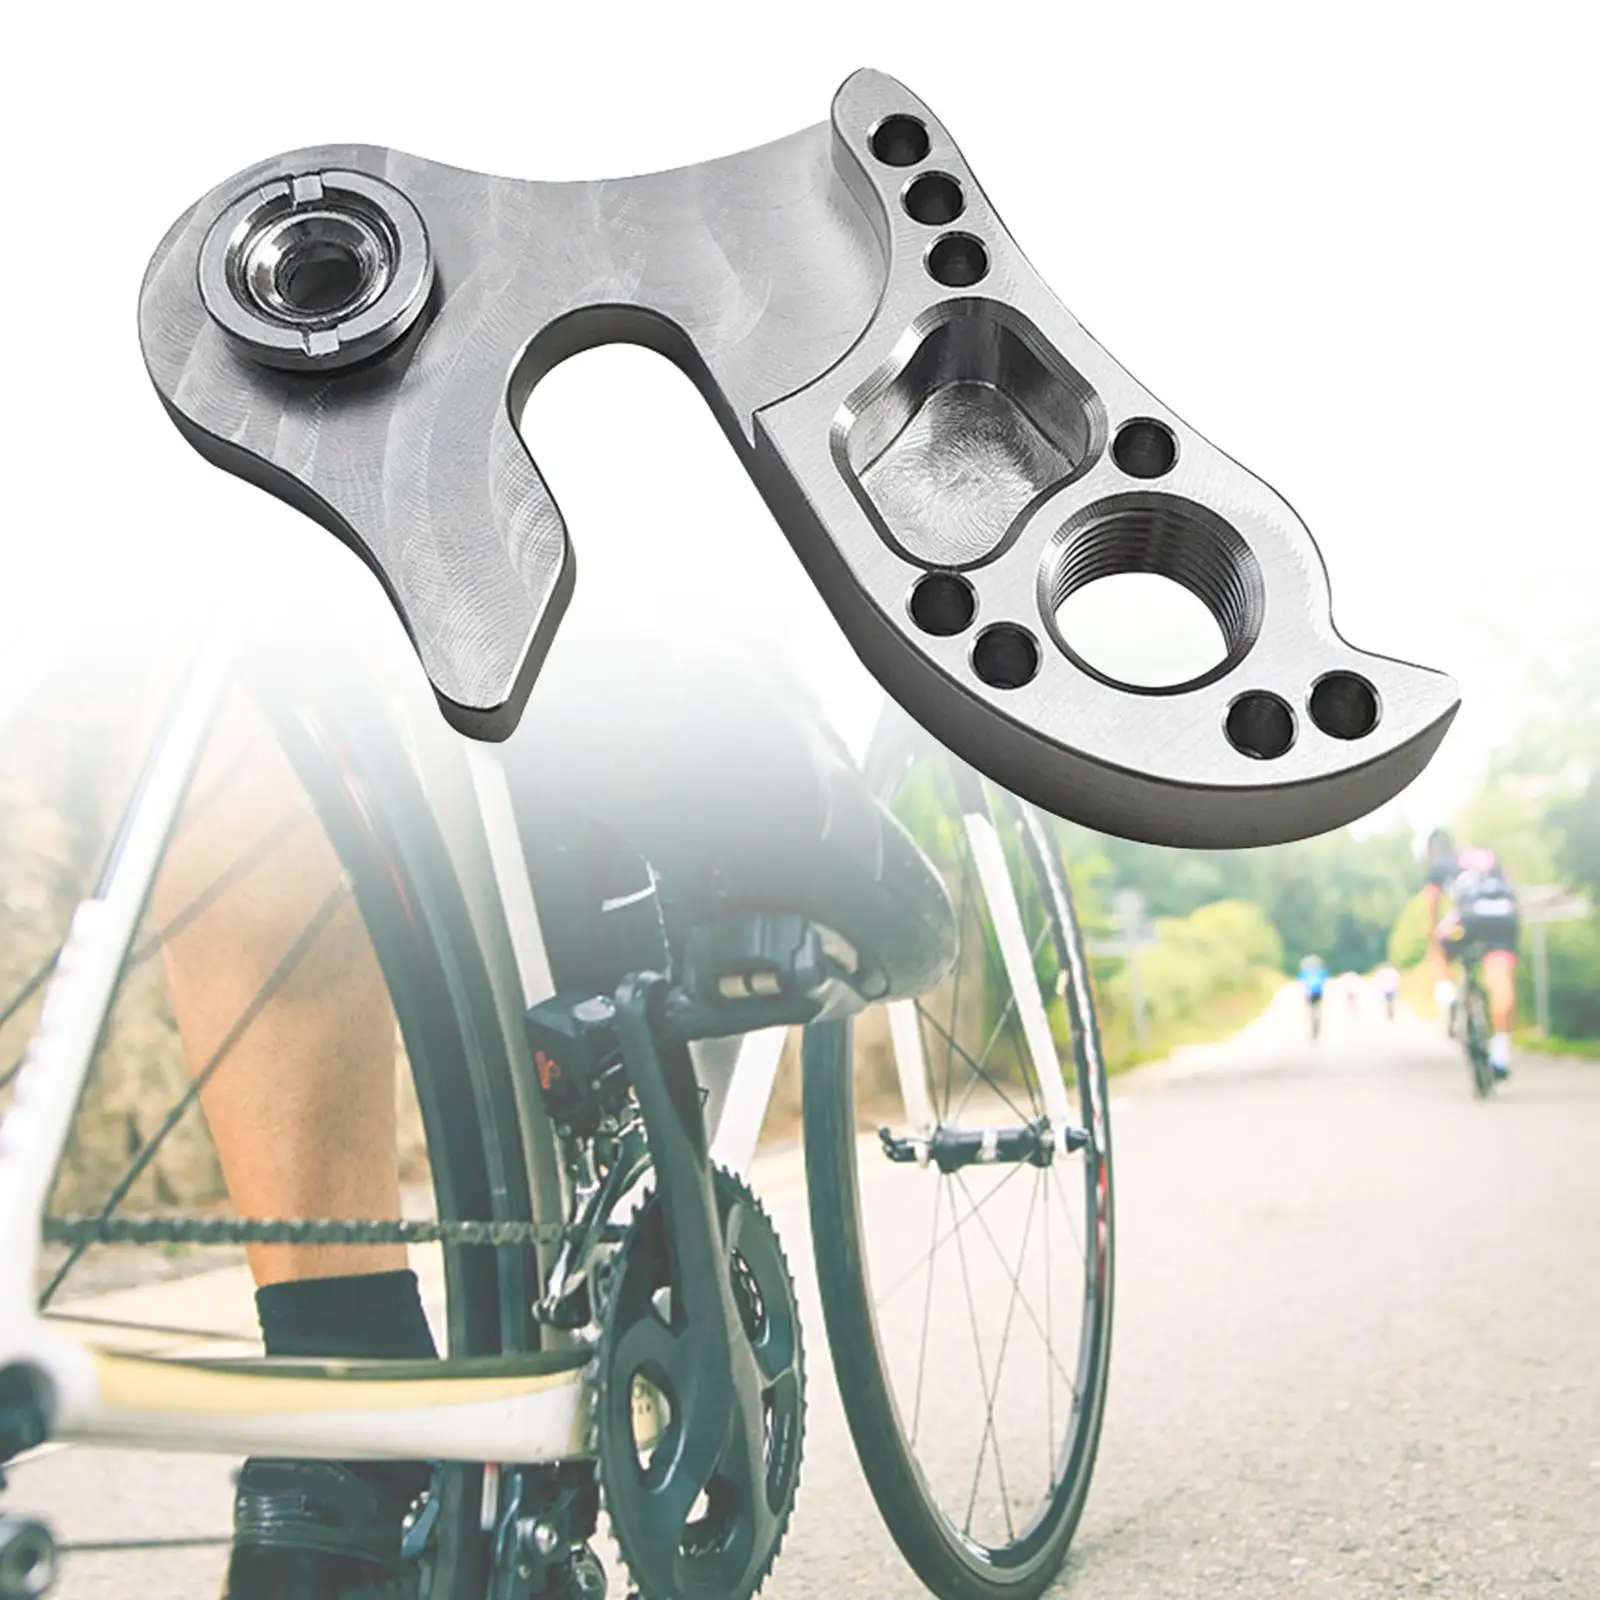 

Universal Derailleur Hanger Silver Extender Parts Stainless Steel Transmission hook Bike Road Bicycle Replace